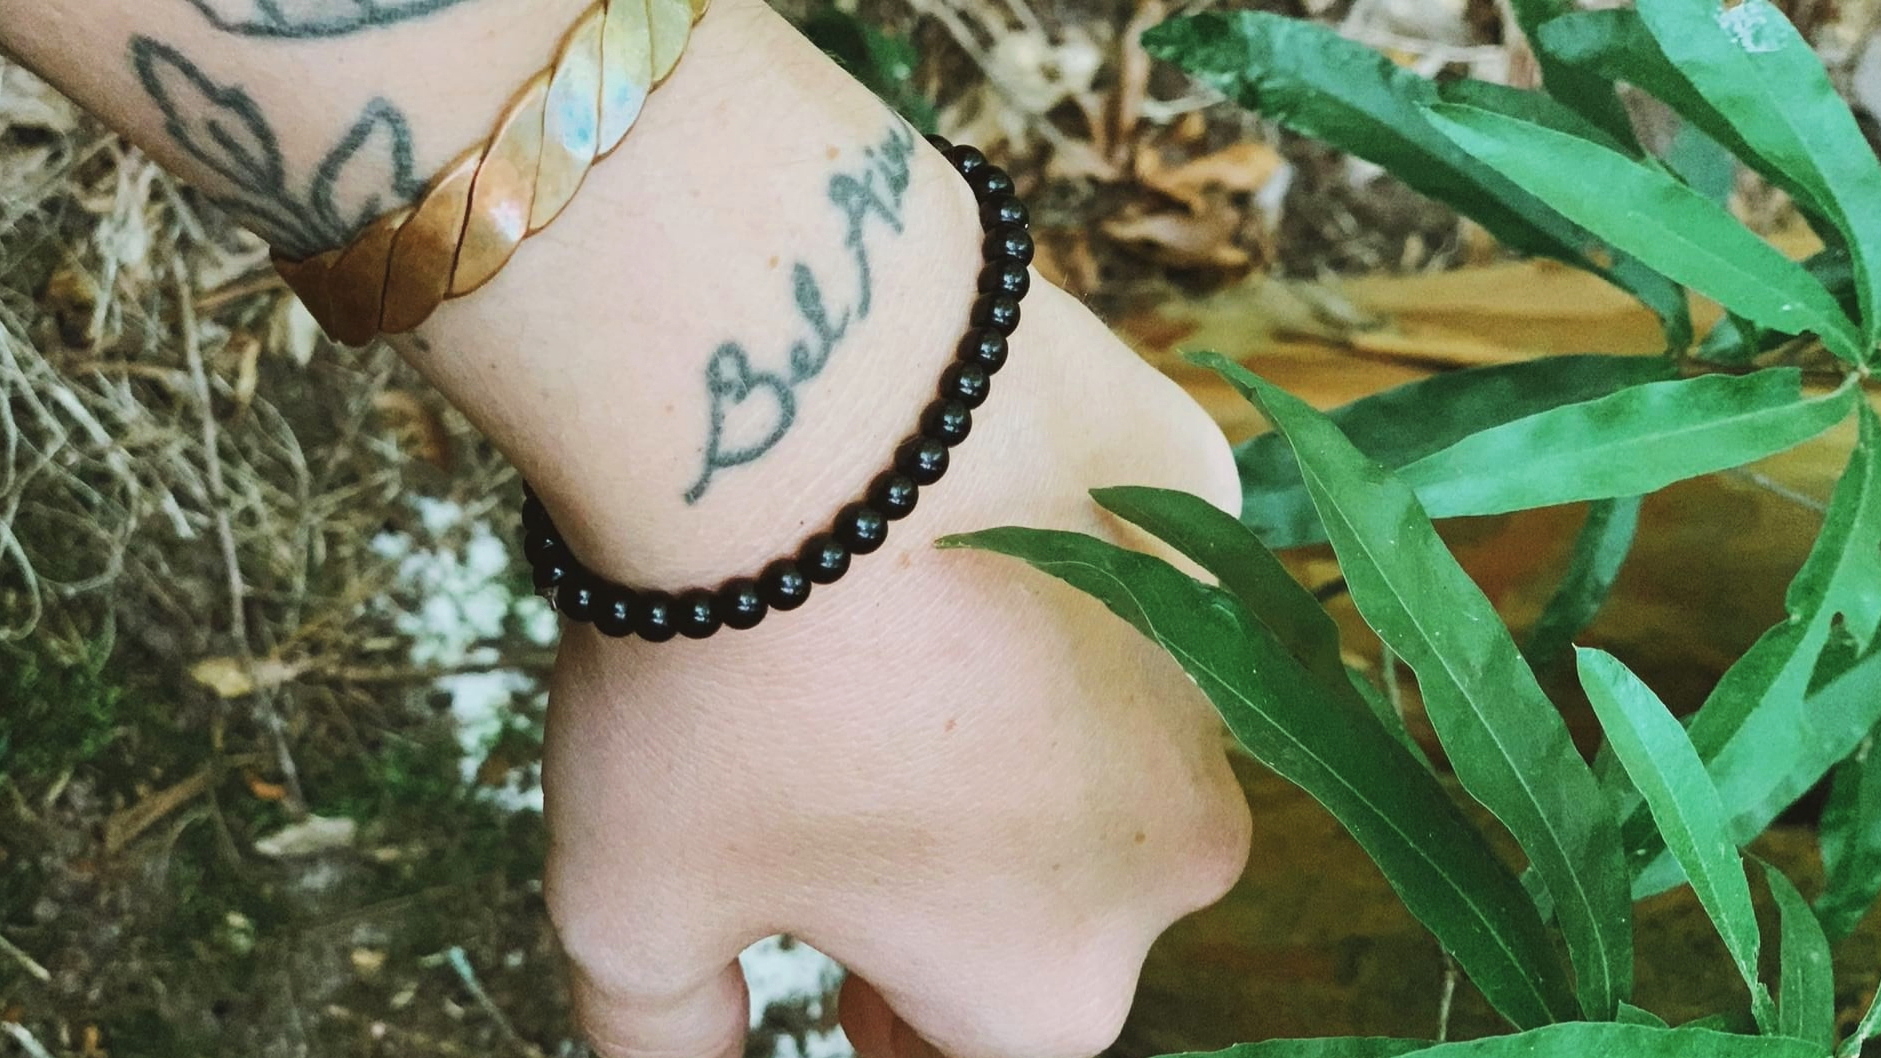 A tattoo with the words “Bel Air” written in cursive on the top of a forearm. The arm has a black beaded bracelet and a gold bracelet and there are grass and leaves in the background.